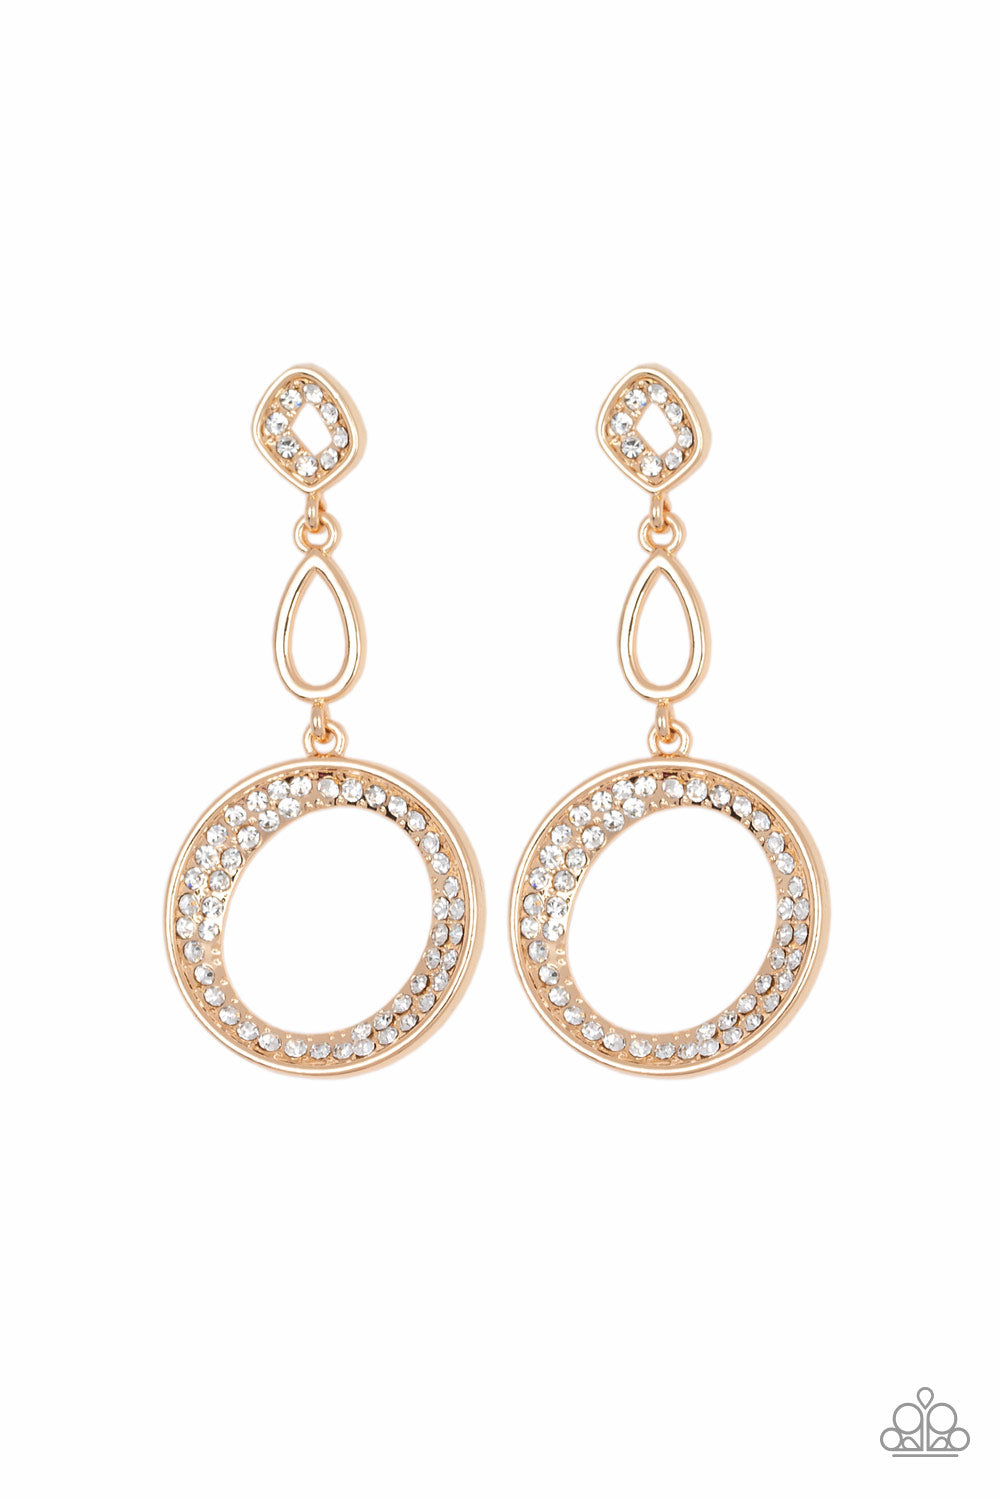 On The Glamour Scene - Gold Earrings - Paparazzi Accessories - Rows of glassy white rhinestones, mismatched beveled gold frames link with a golden teardrop as they trickle from the ear, coalescing into a glamorous lure. Earring attaches to a standard post fitting.